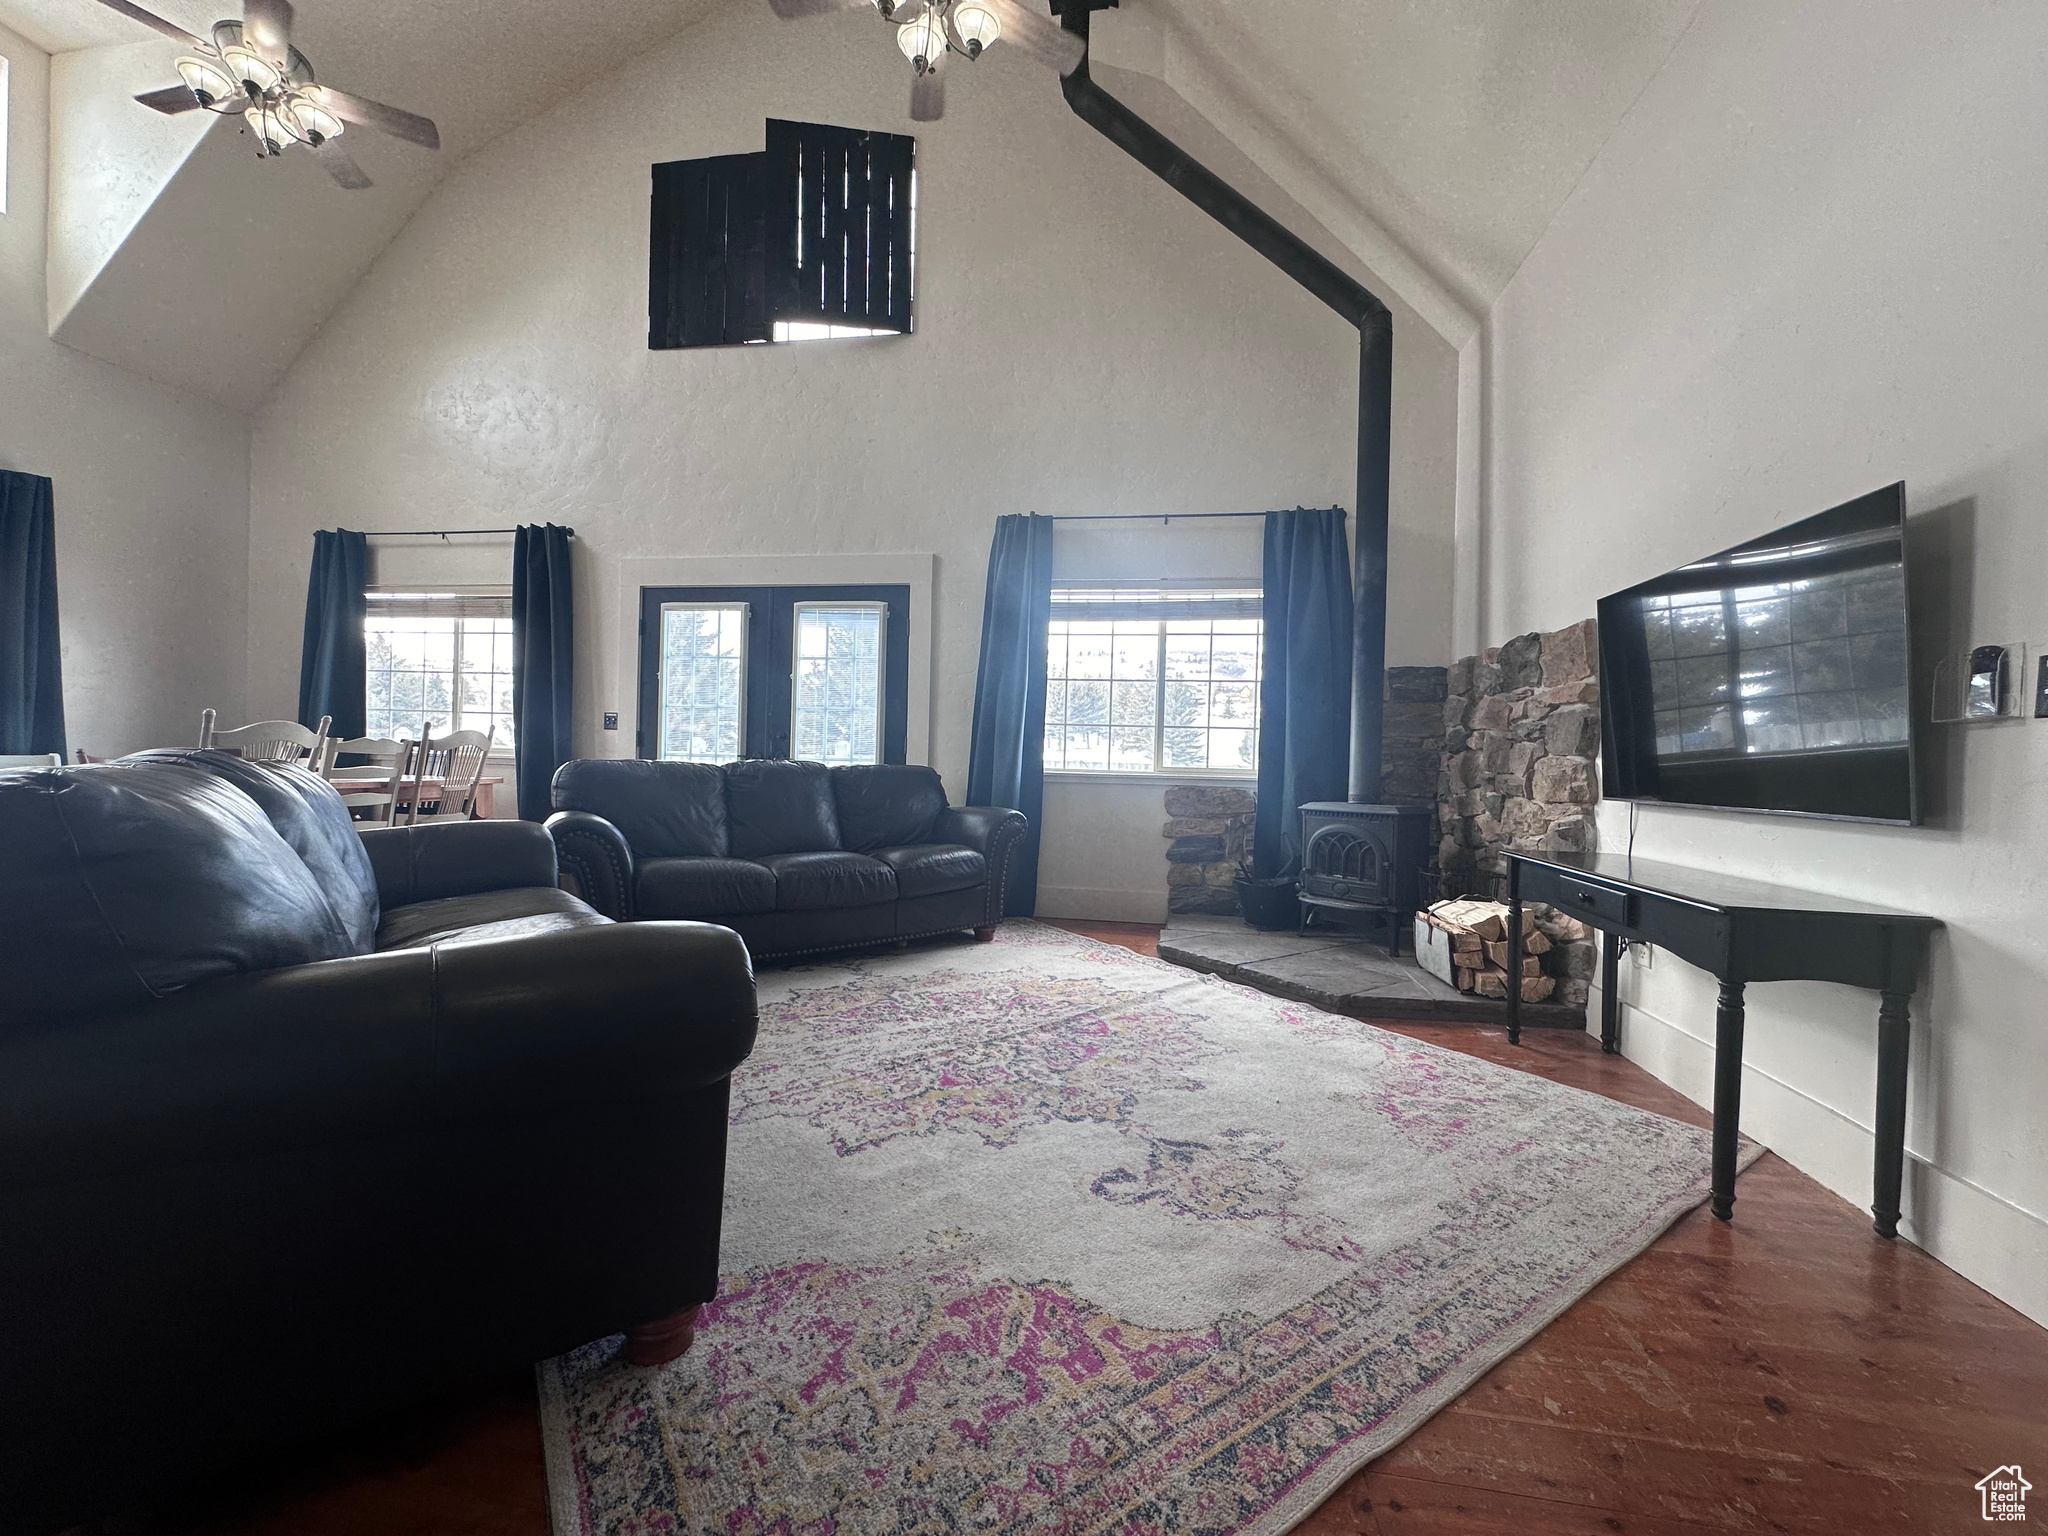 Living room with hardwood floors, a wood stove, plenty of natural light, and ceiling fan